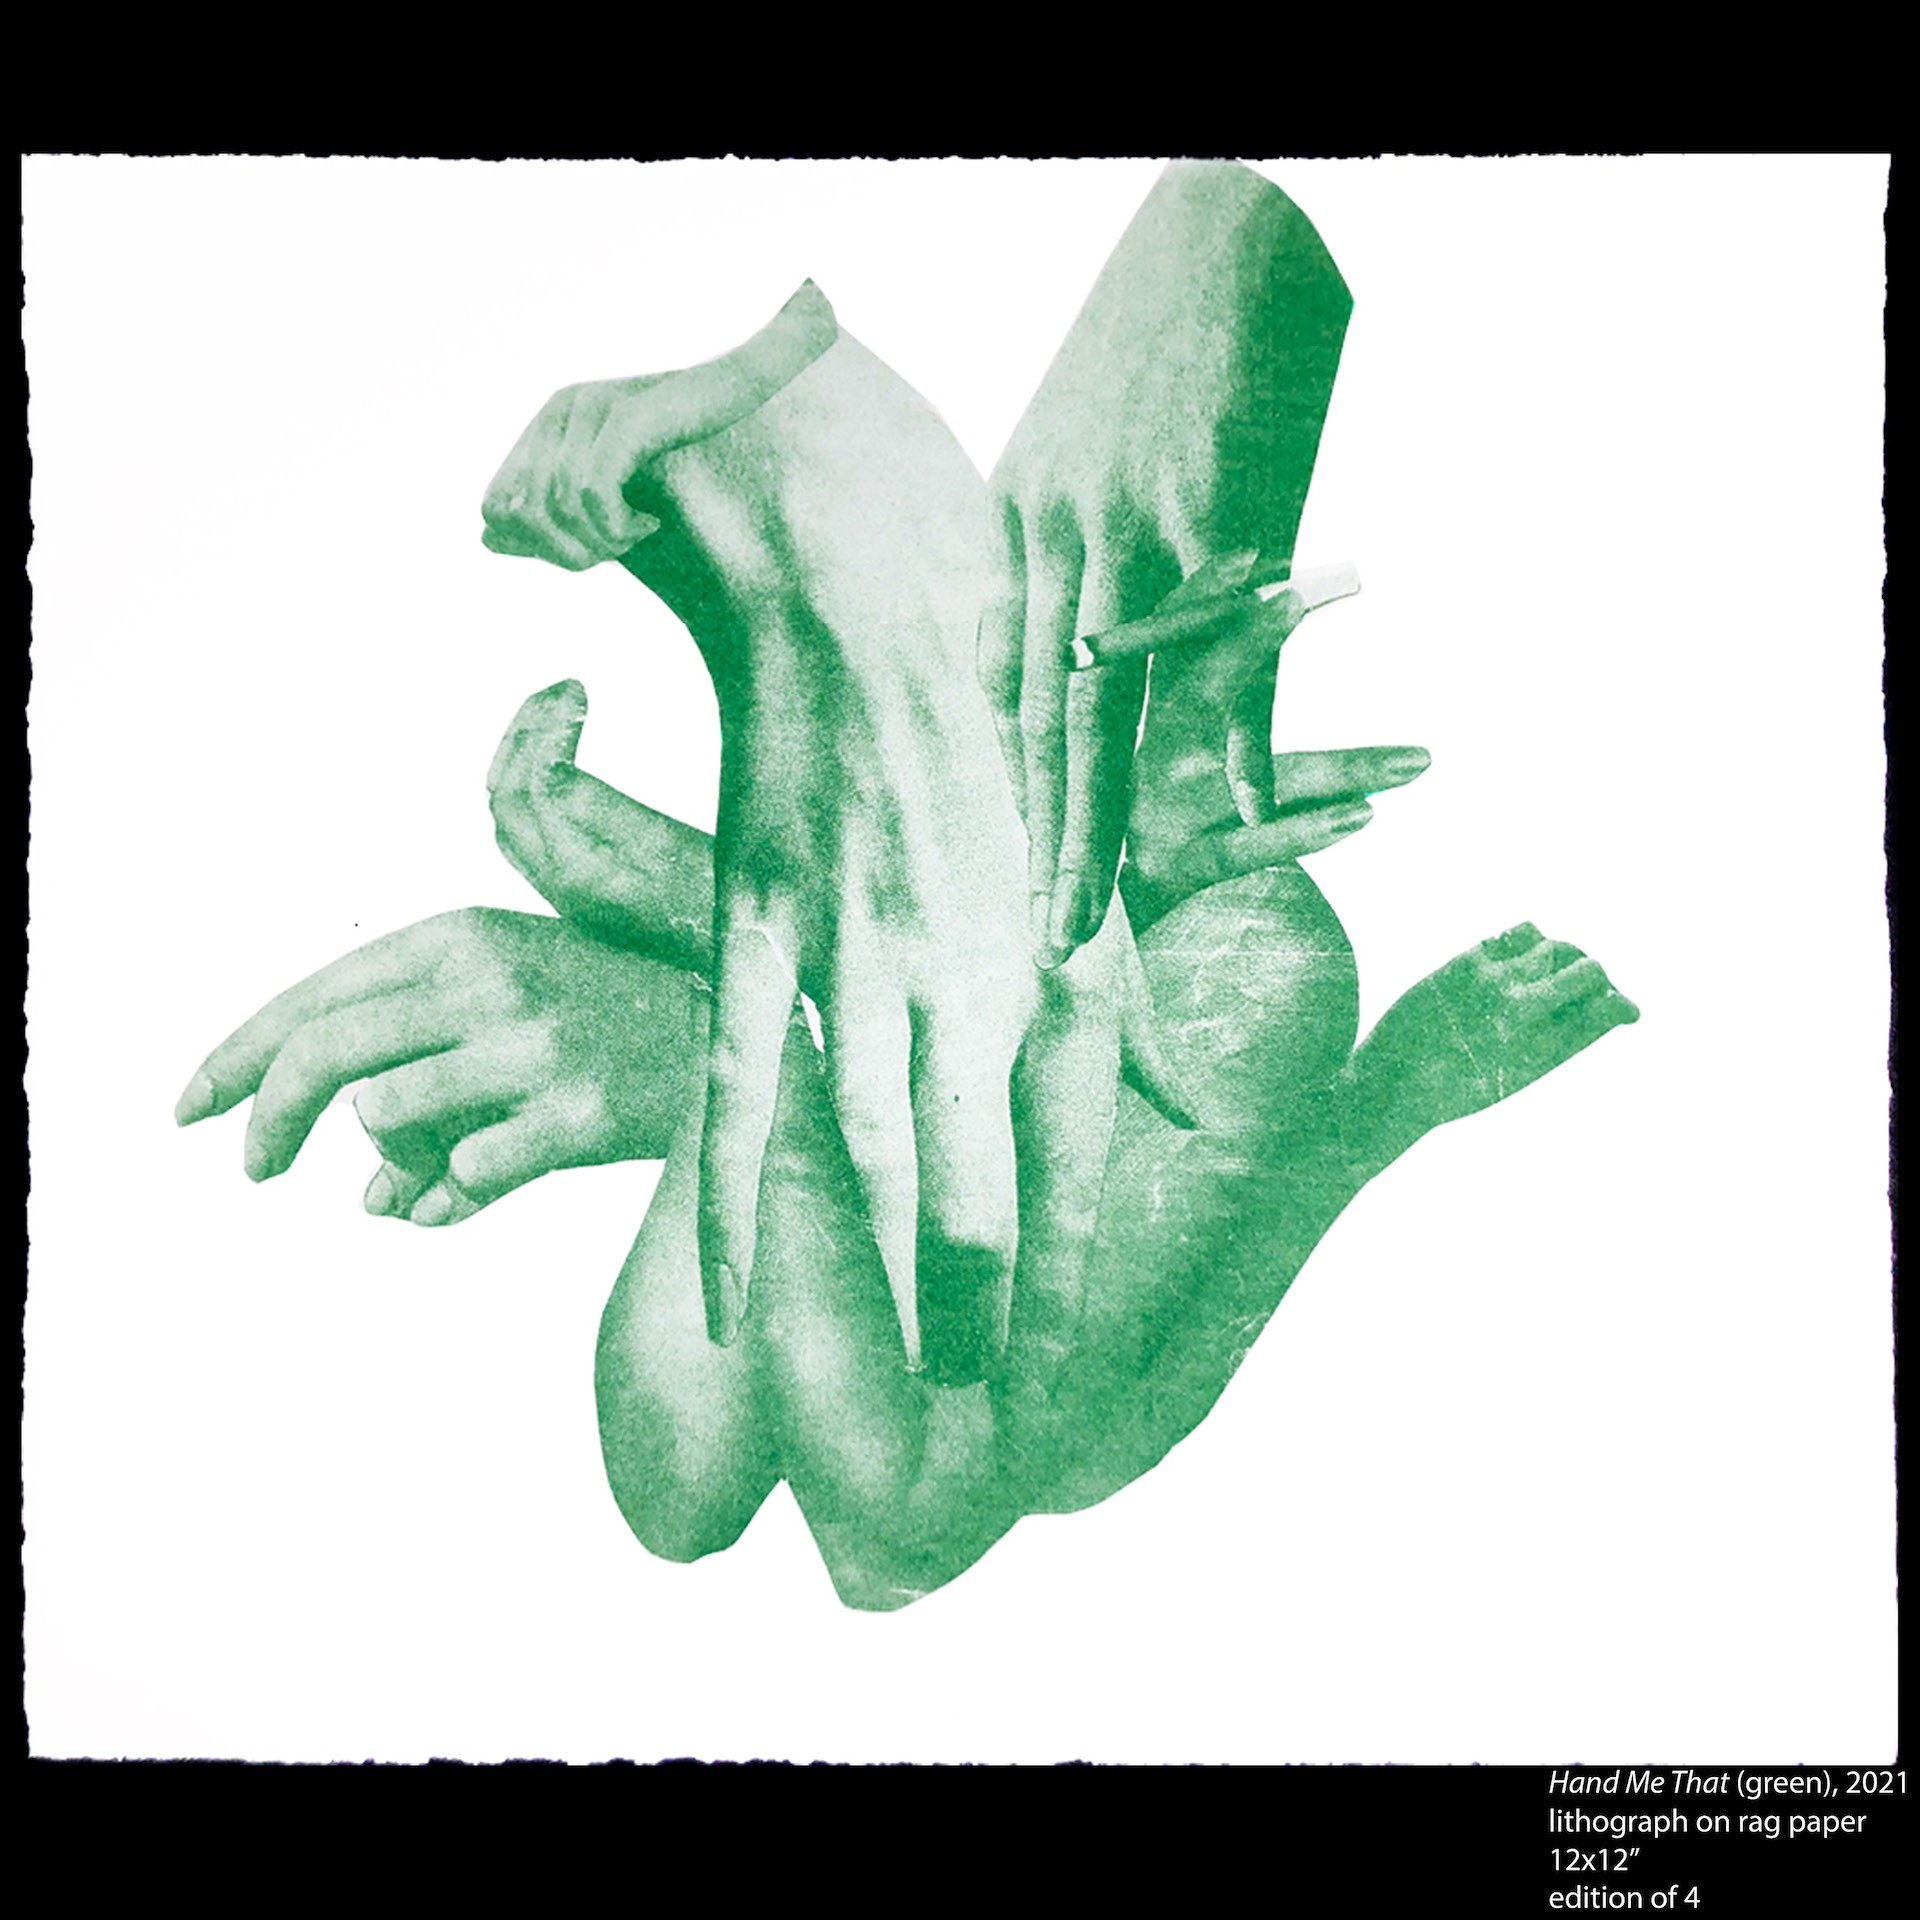 Green collage of hands by Jordan Utting